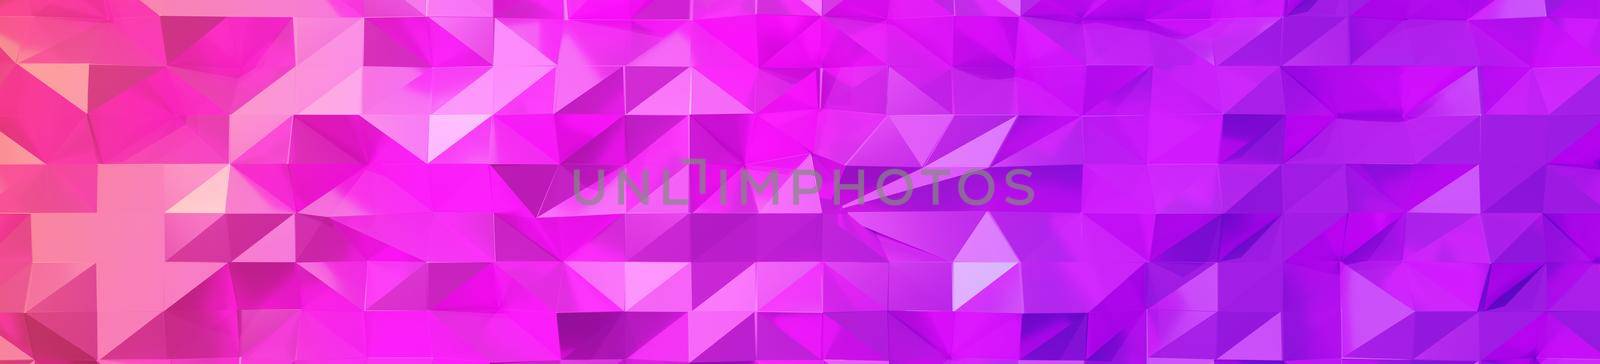 abstract geometric pattern background polygon background pink purple gradation background 3d rendering by noppha80